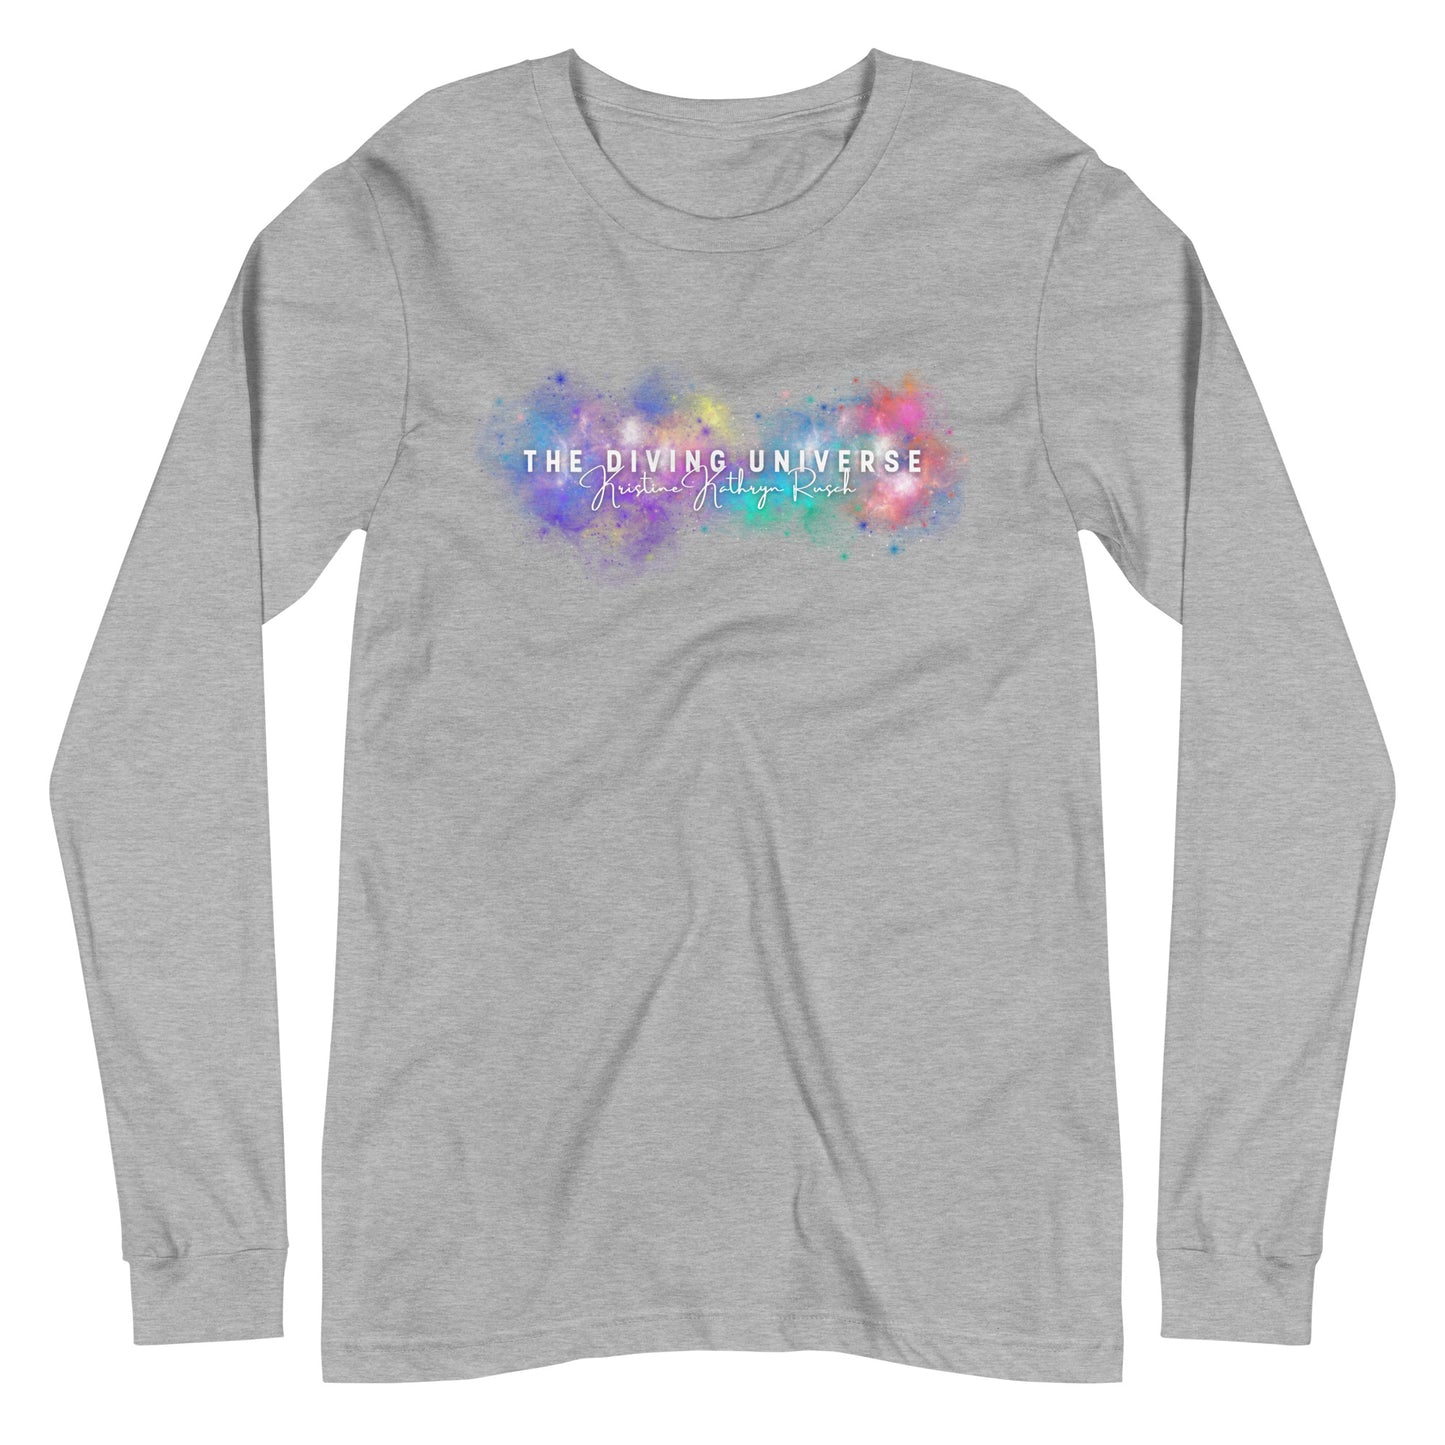 DIVING UNIVERSE NEBULA L/S Tee - The Diving Universe by Kristine Kathryn Rusch